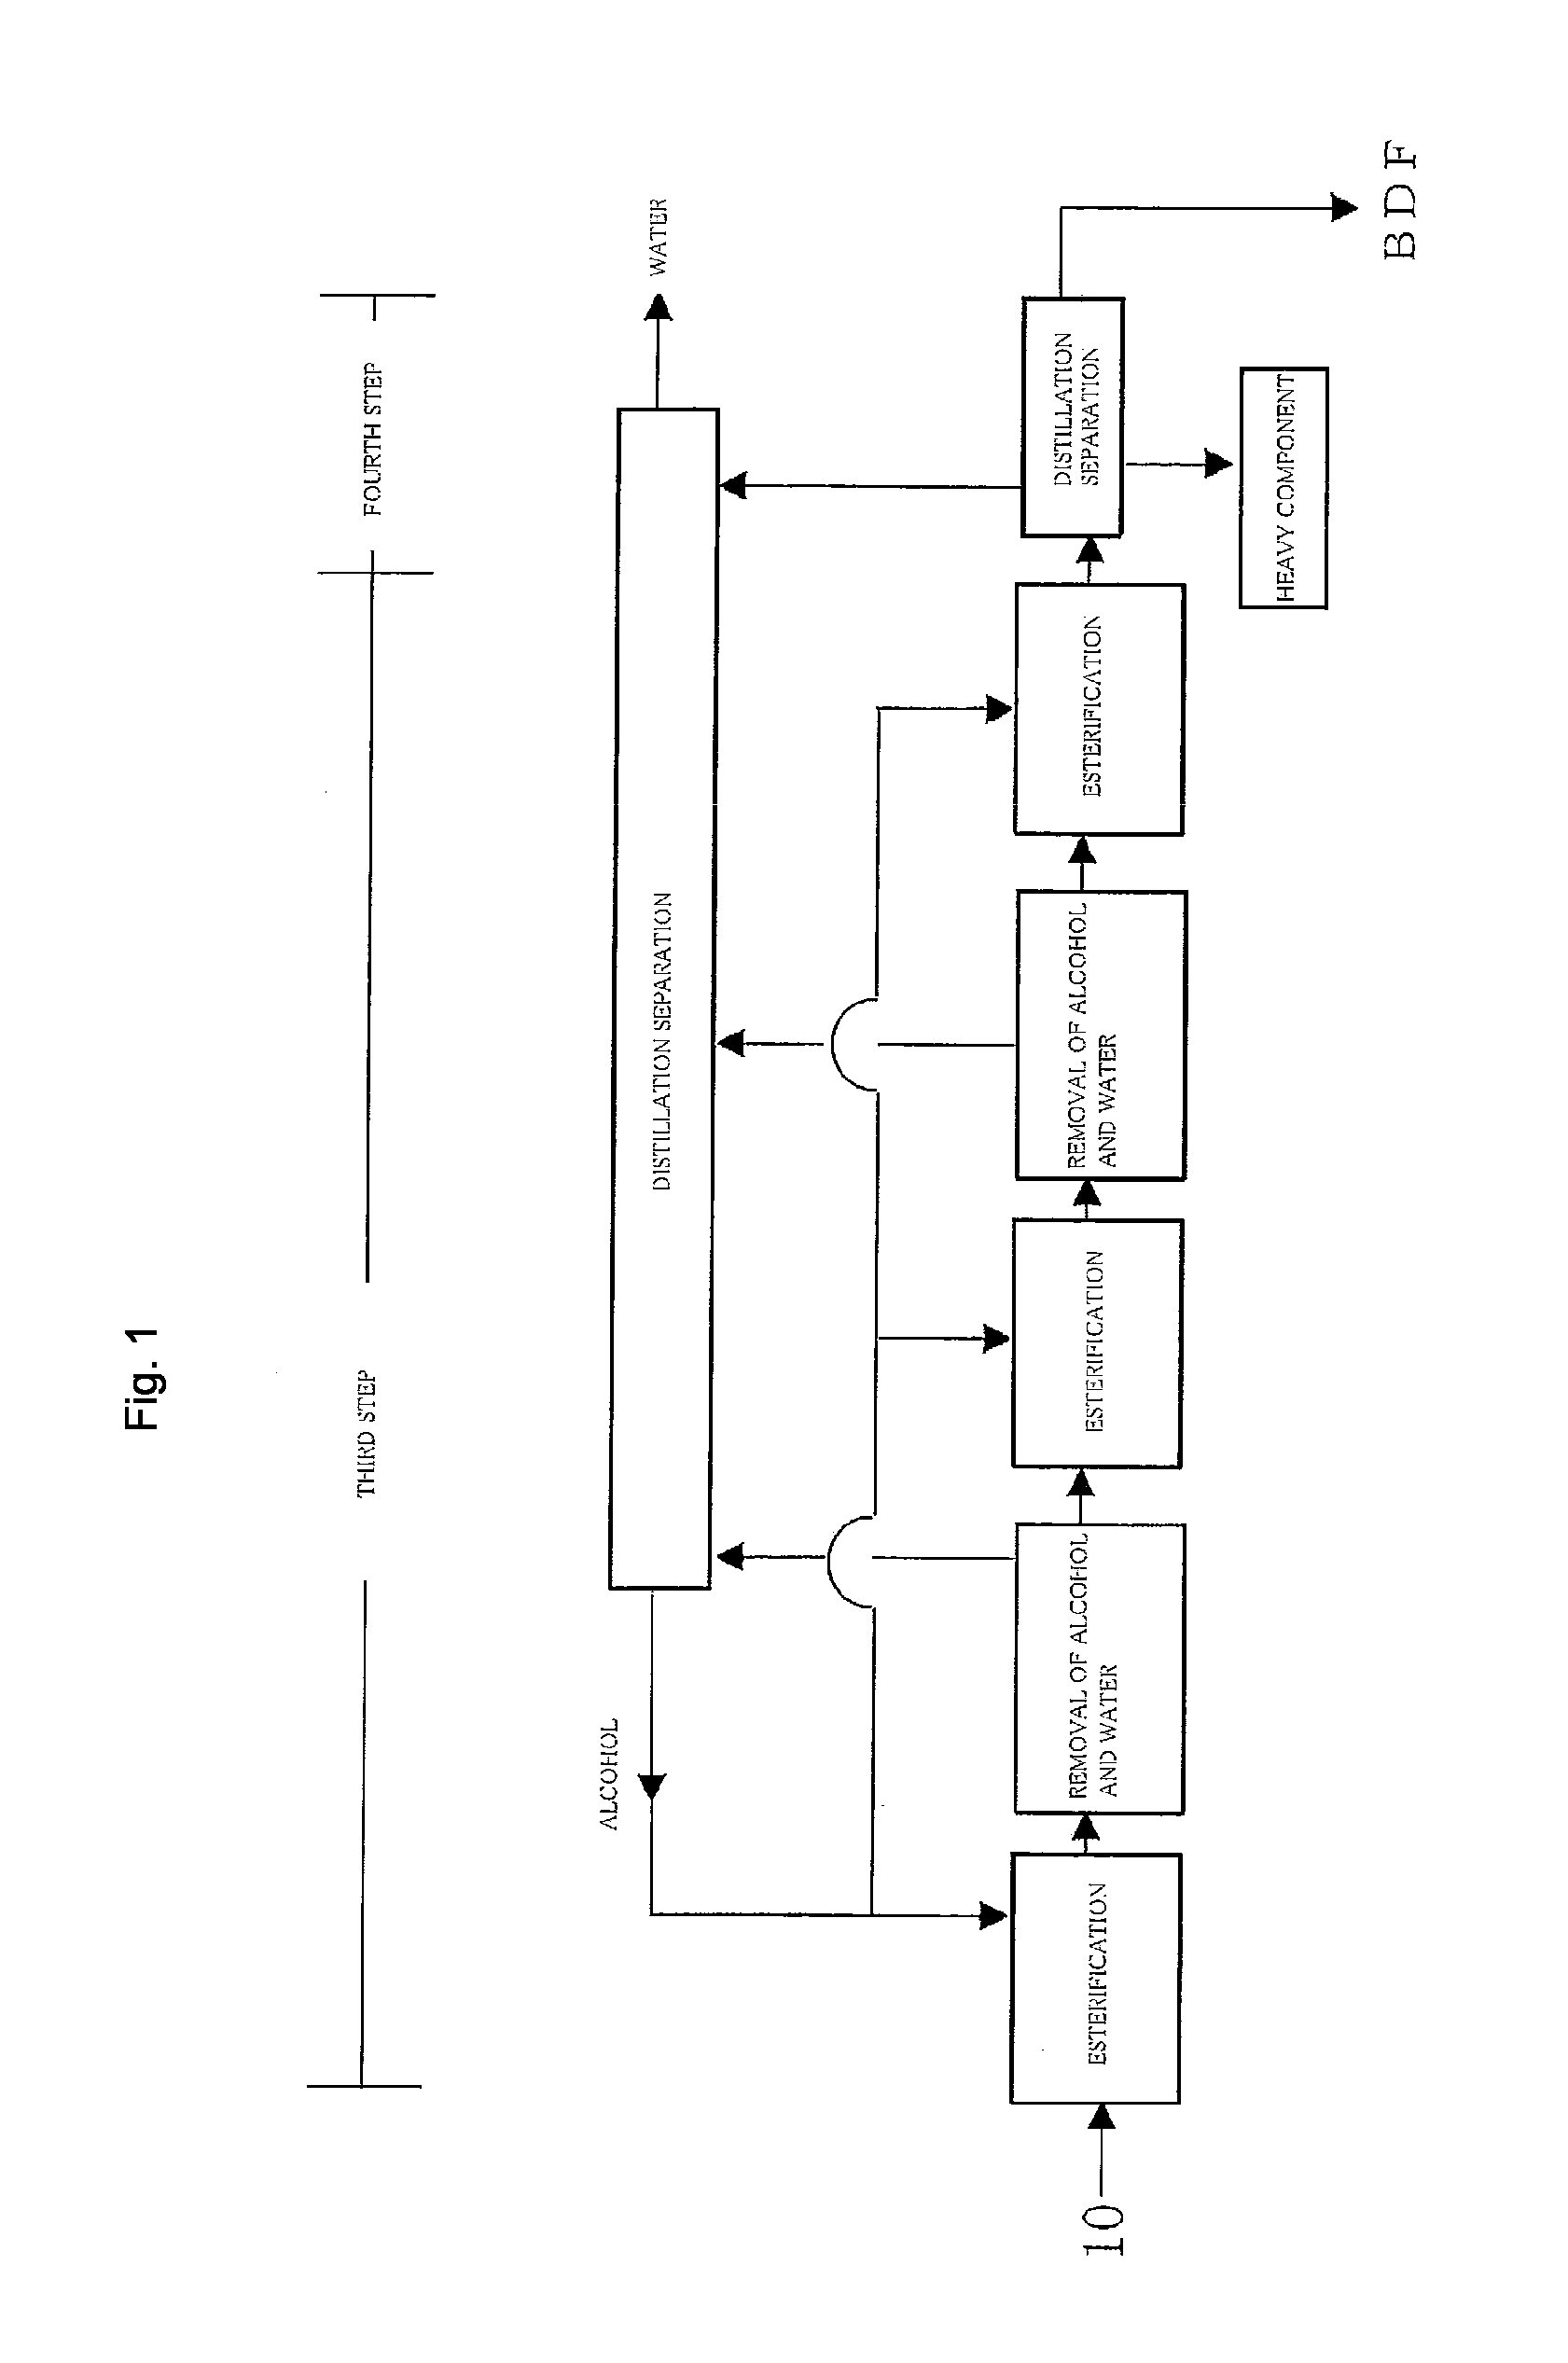 Method for producing fatty acid monoesterified product using solid acid catalyst